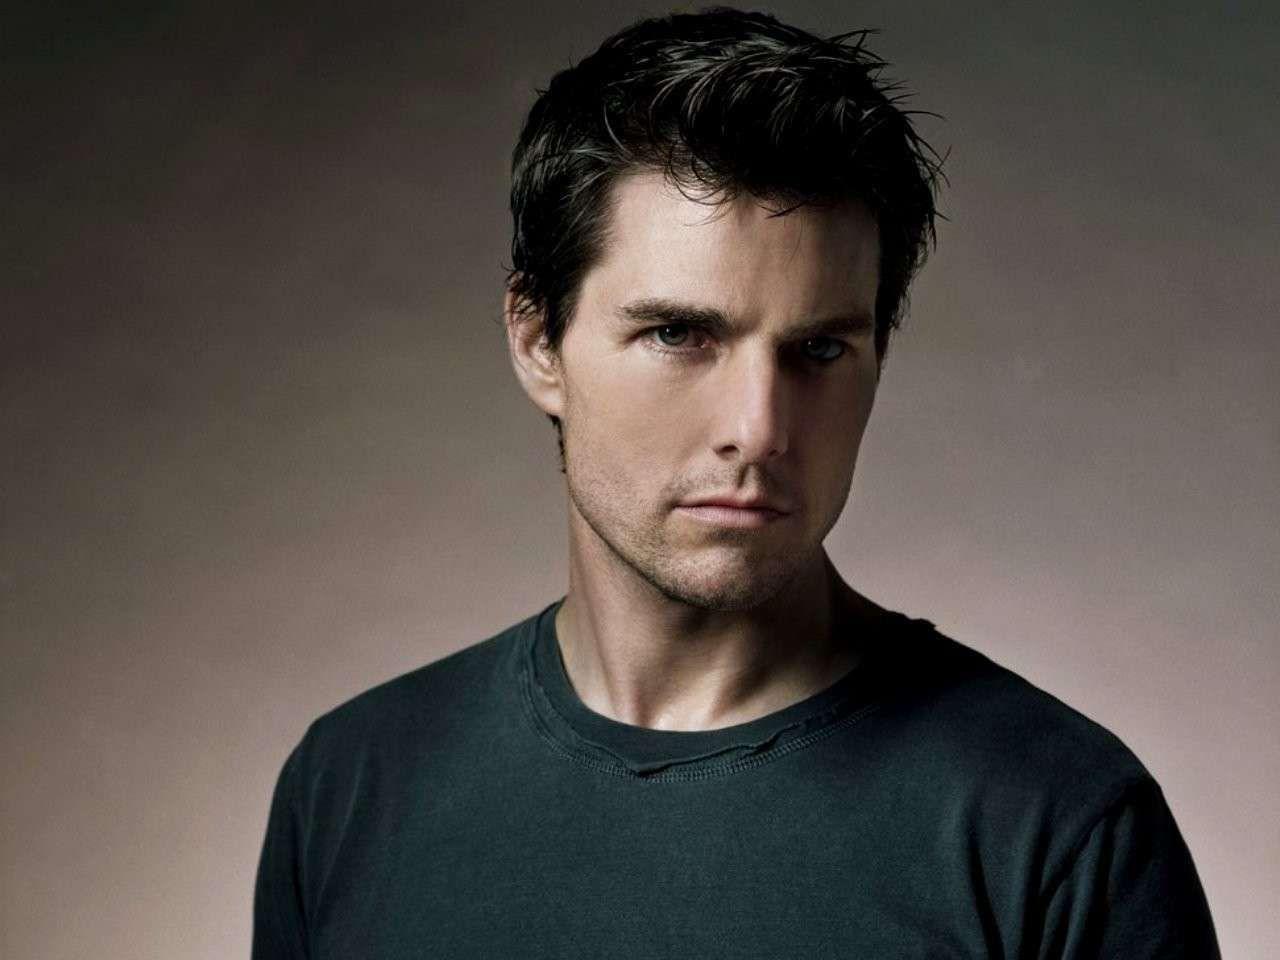 Tom Cruise 3D live Wallpaper For Android Mobile Phone | Tom cruise, Live  wallpapers, Android wallpaper